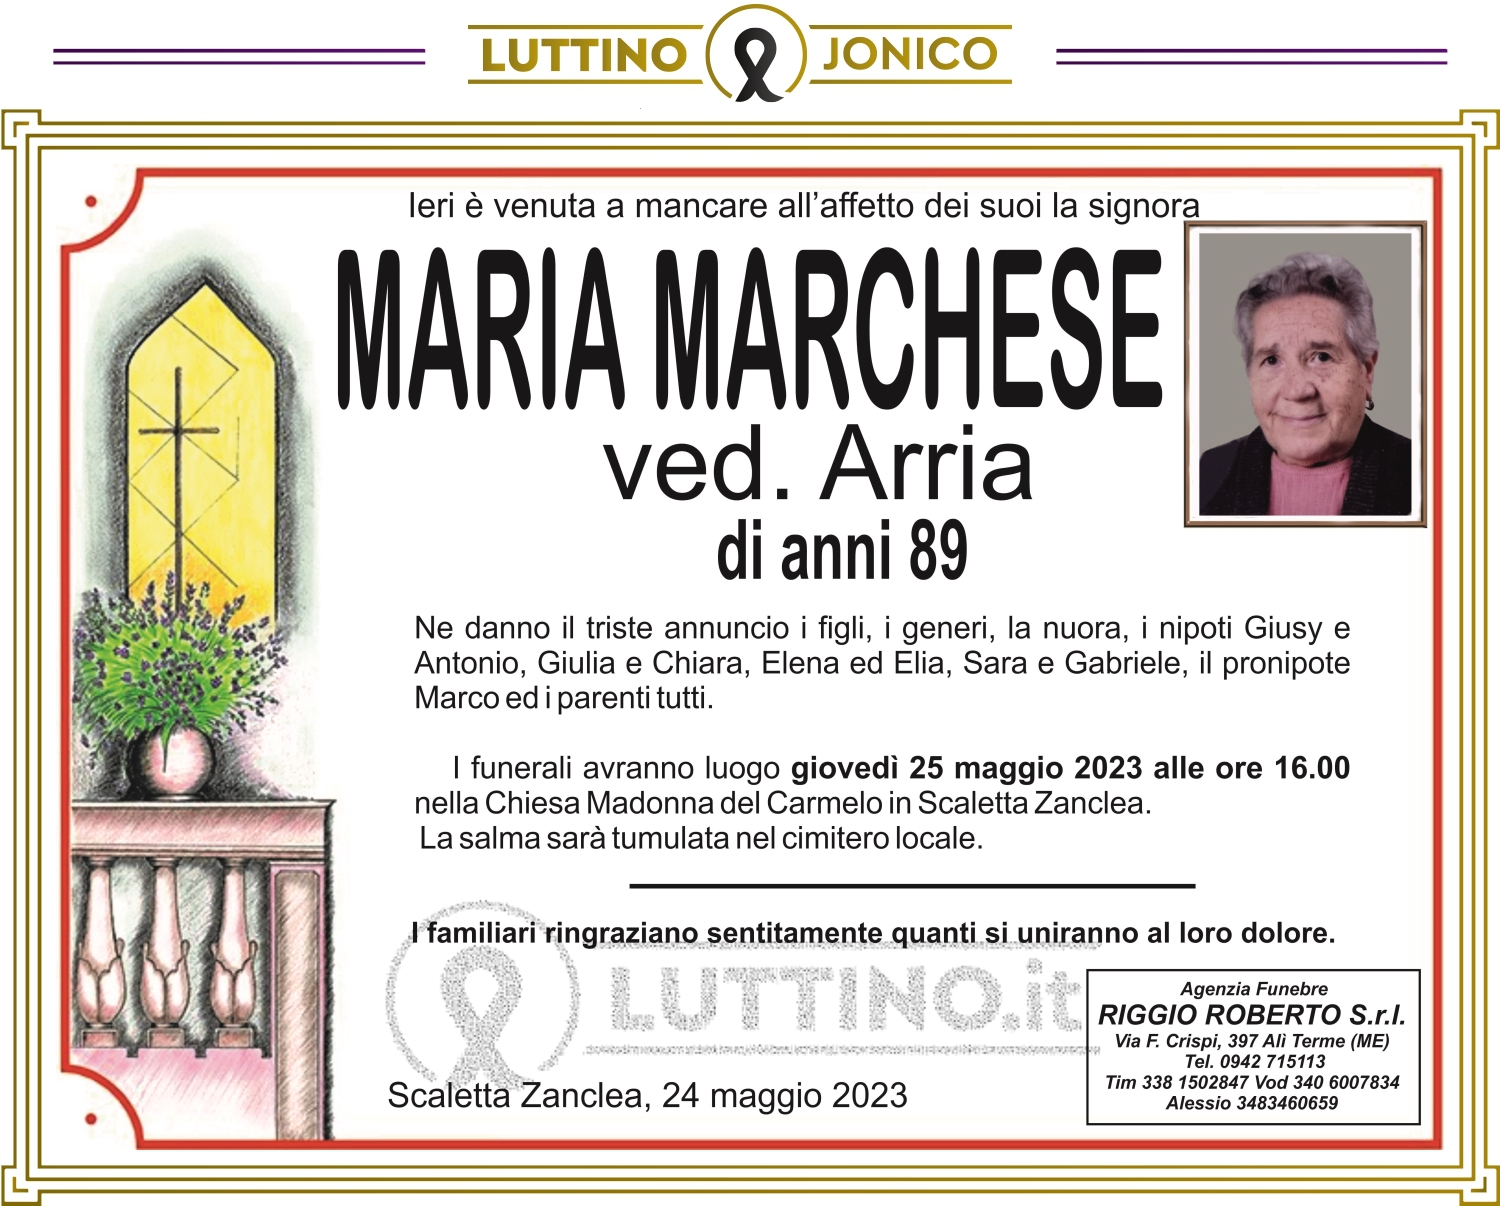 Maria Marchese